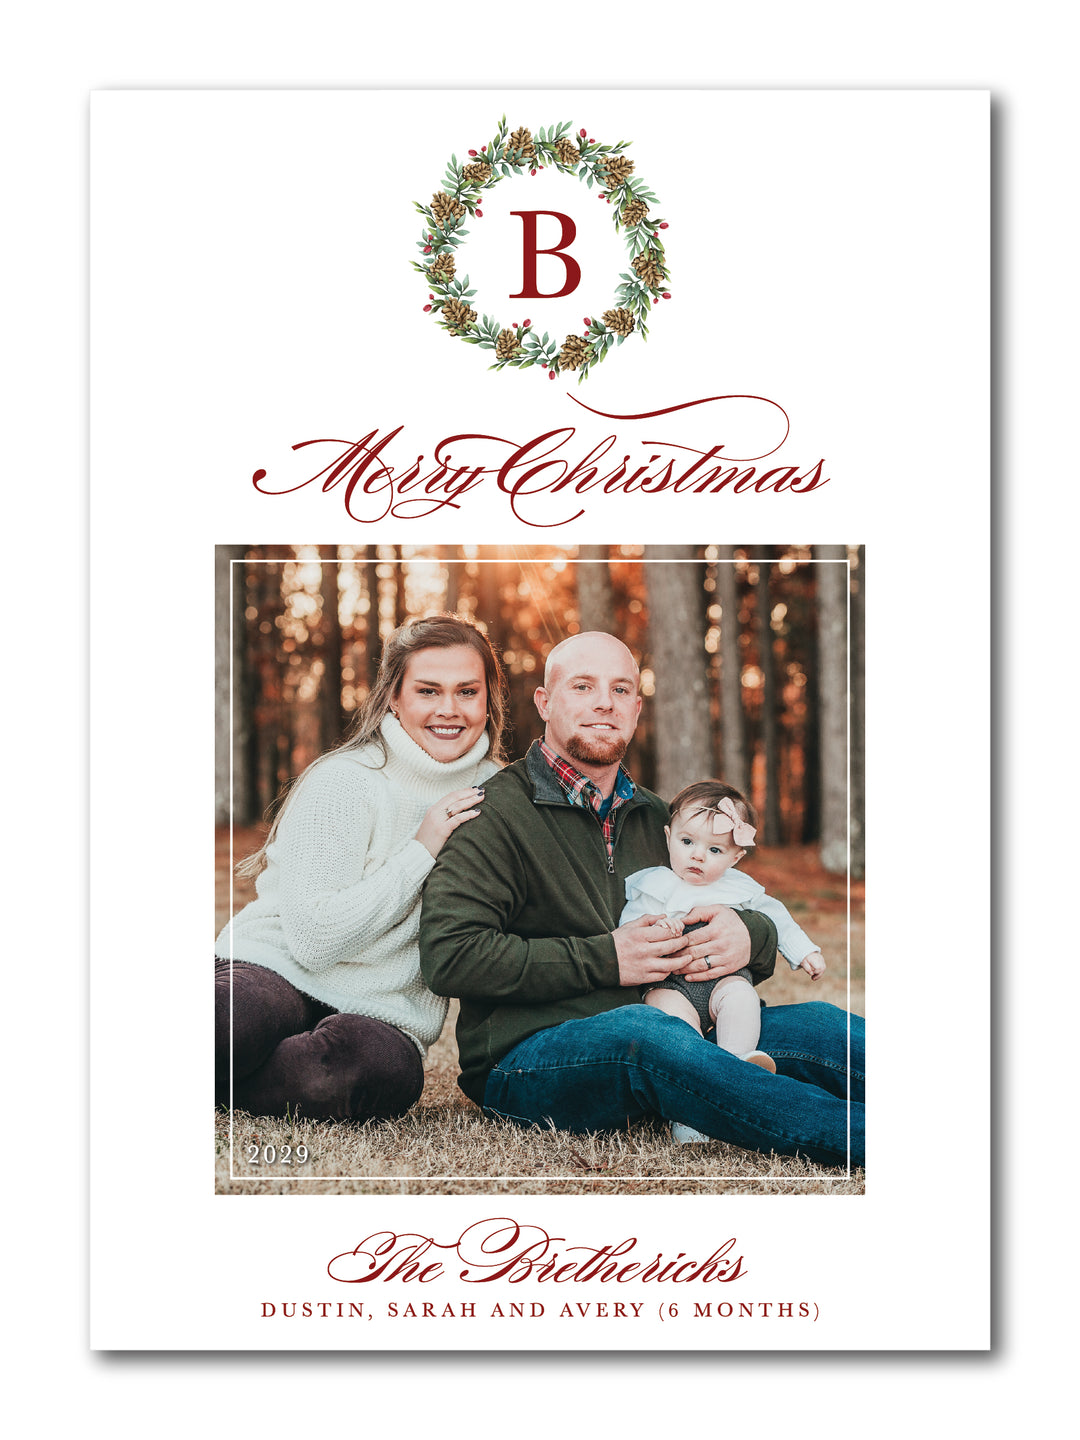 The Bretherick Christmas Card